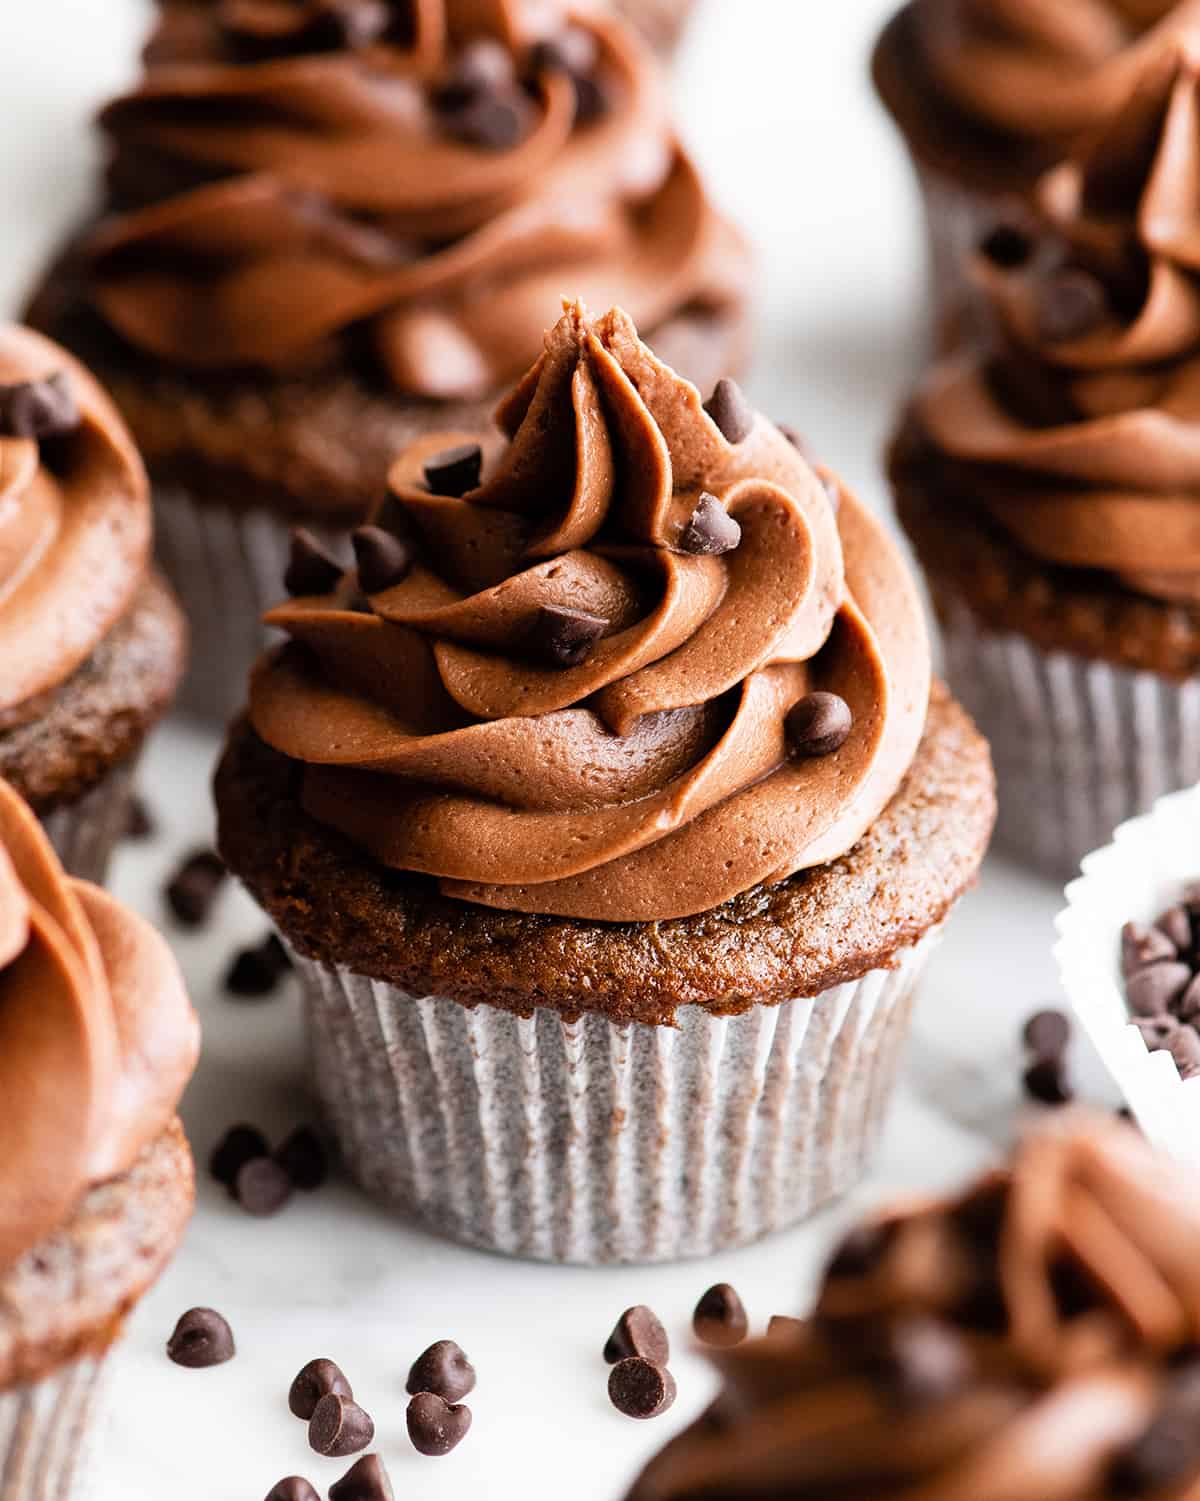 front view of chocolate cupcakes with chocolate frosting